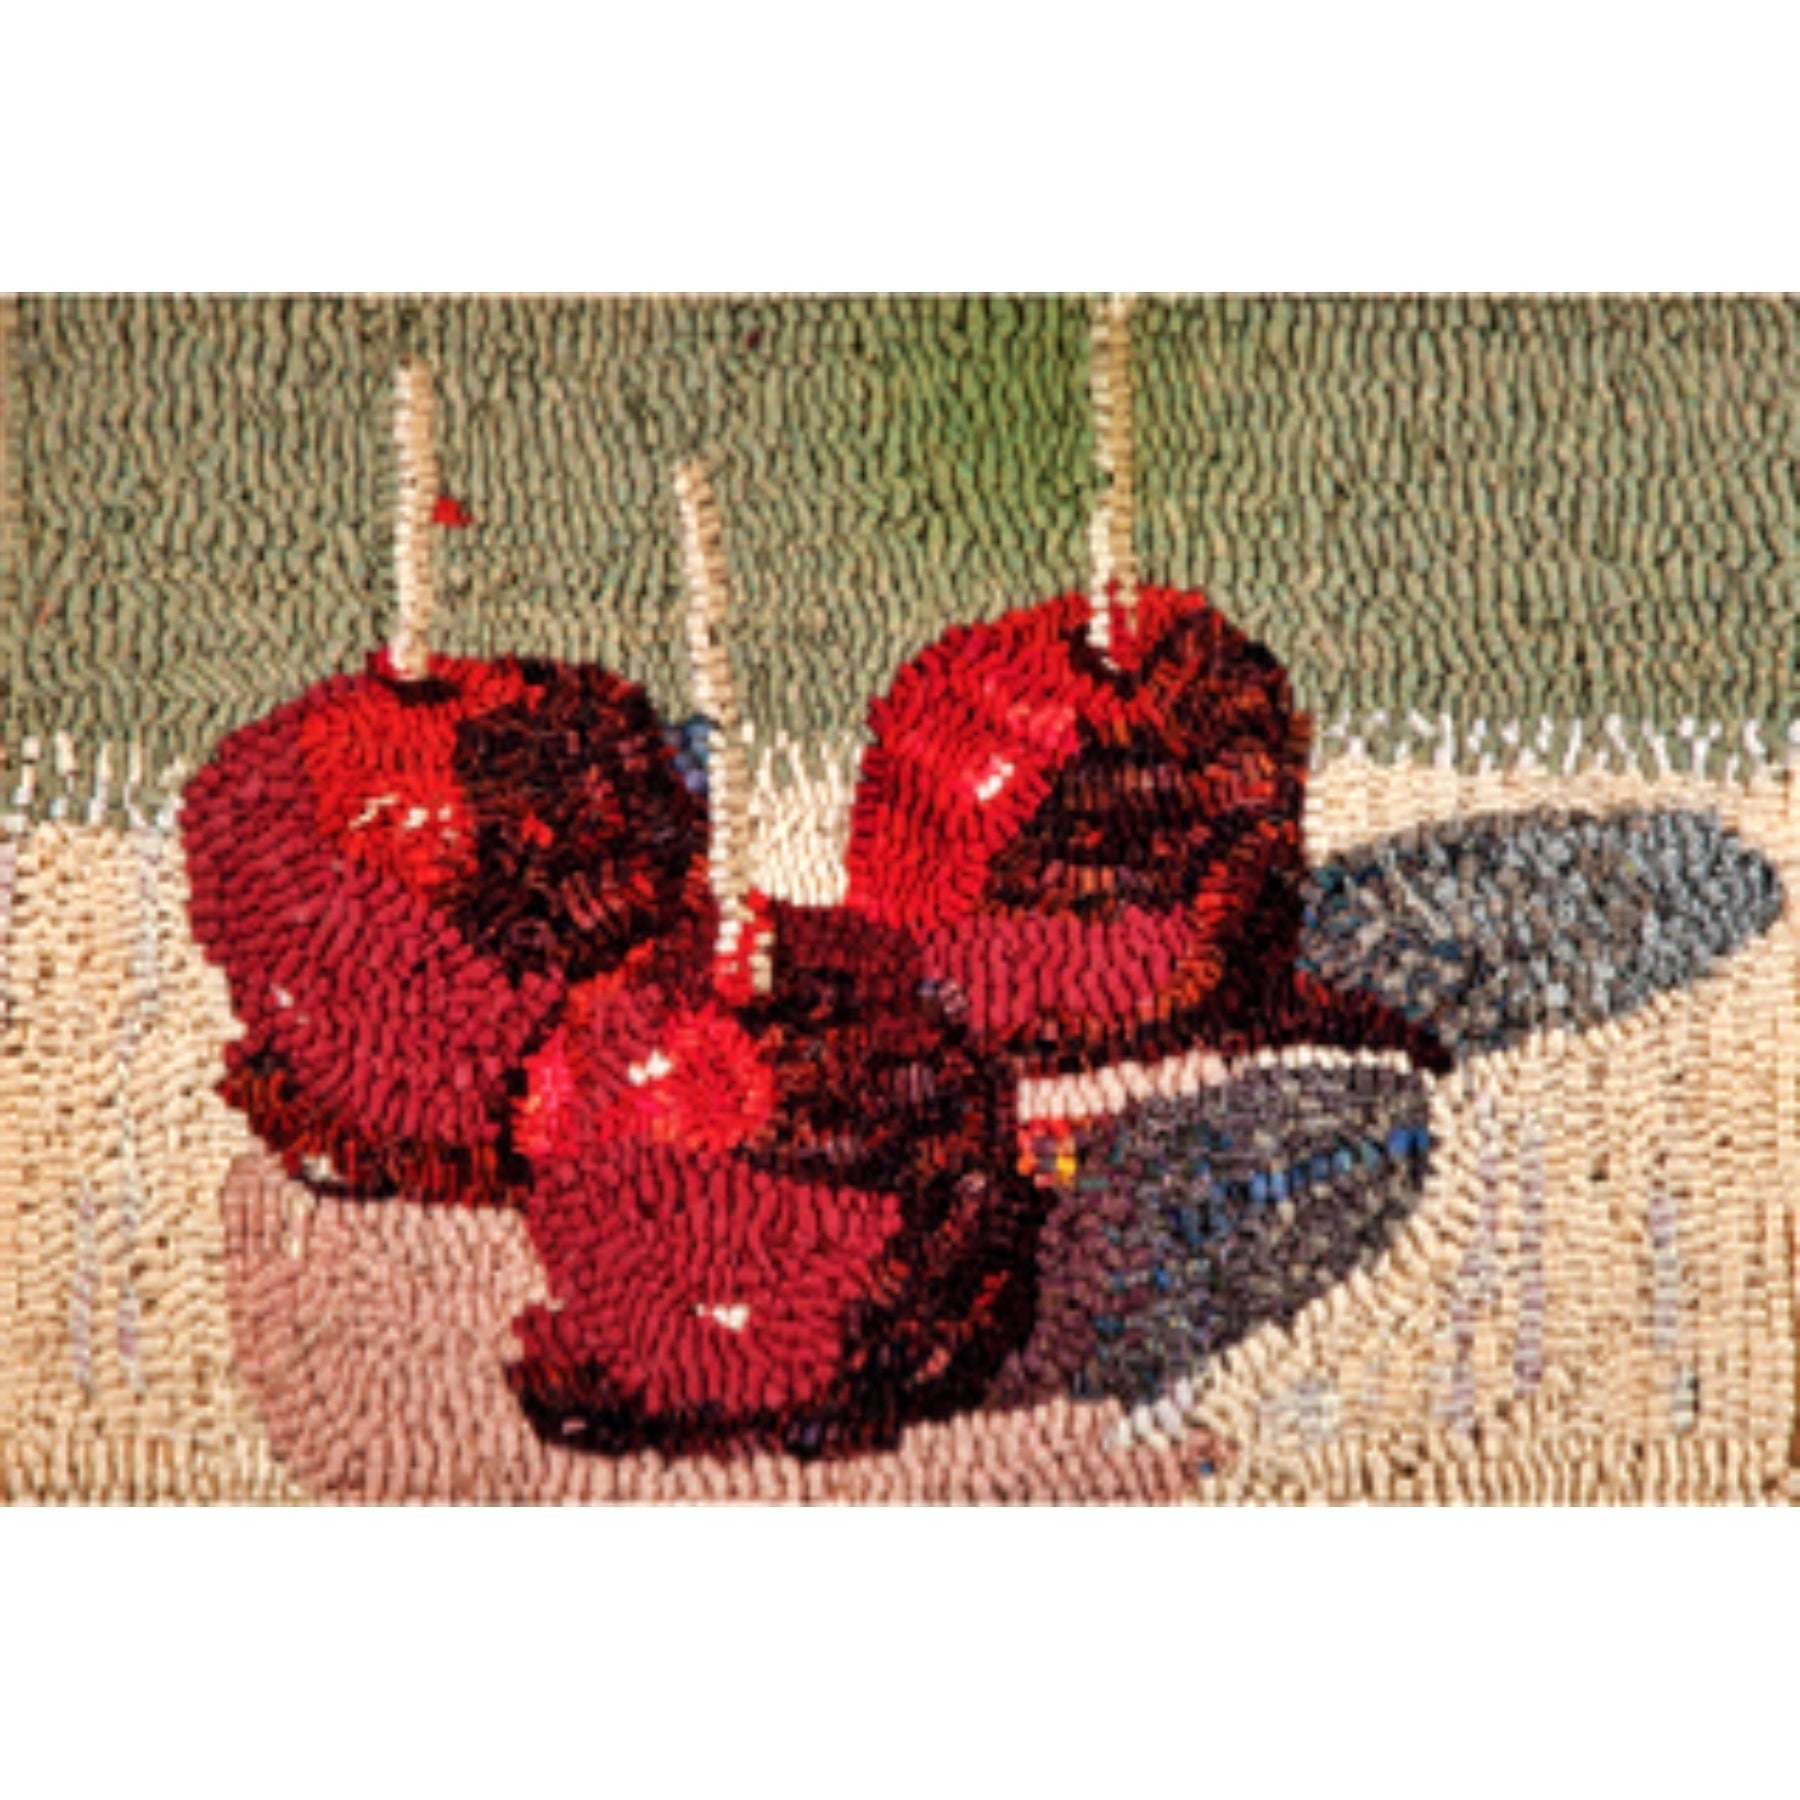 Candy Apples, rug hooked by Victoria Rudolph